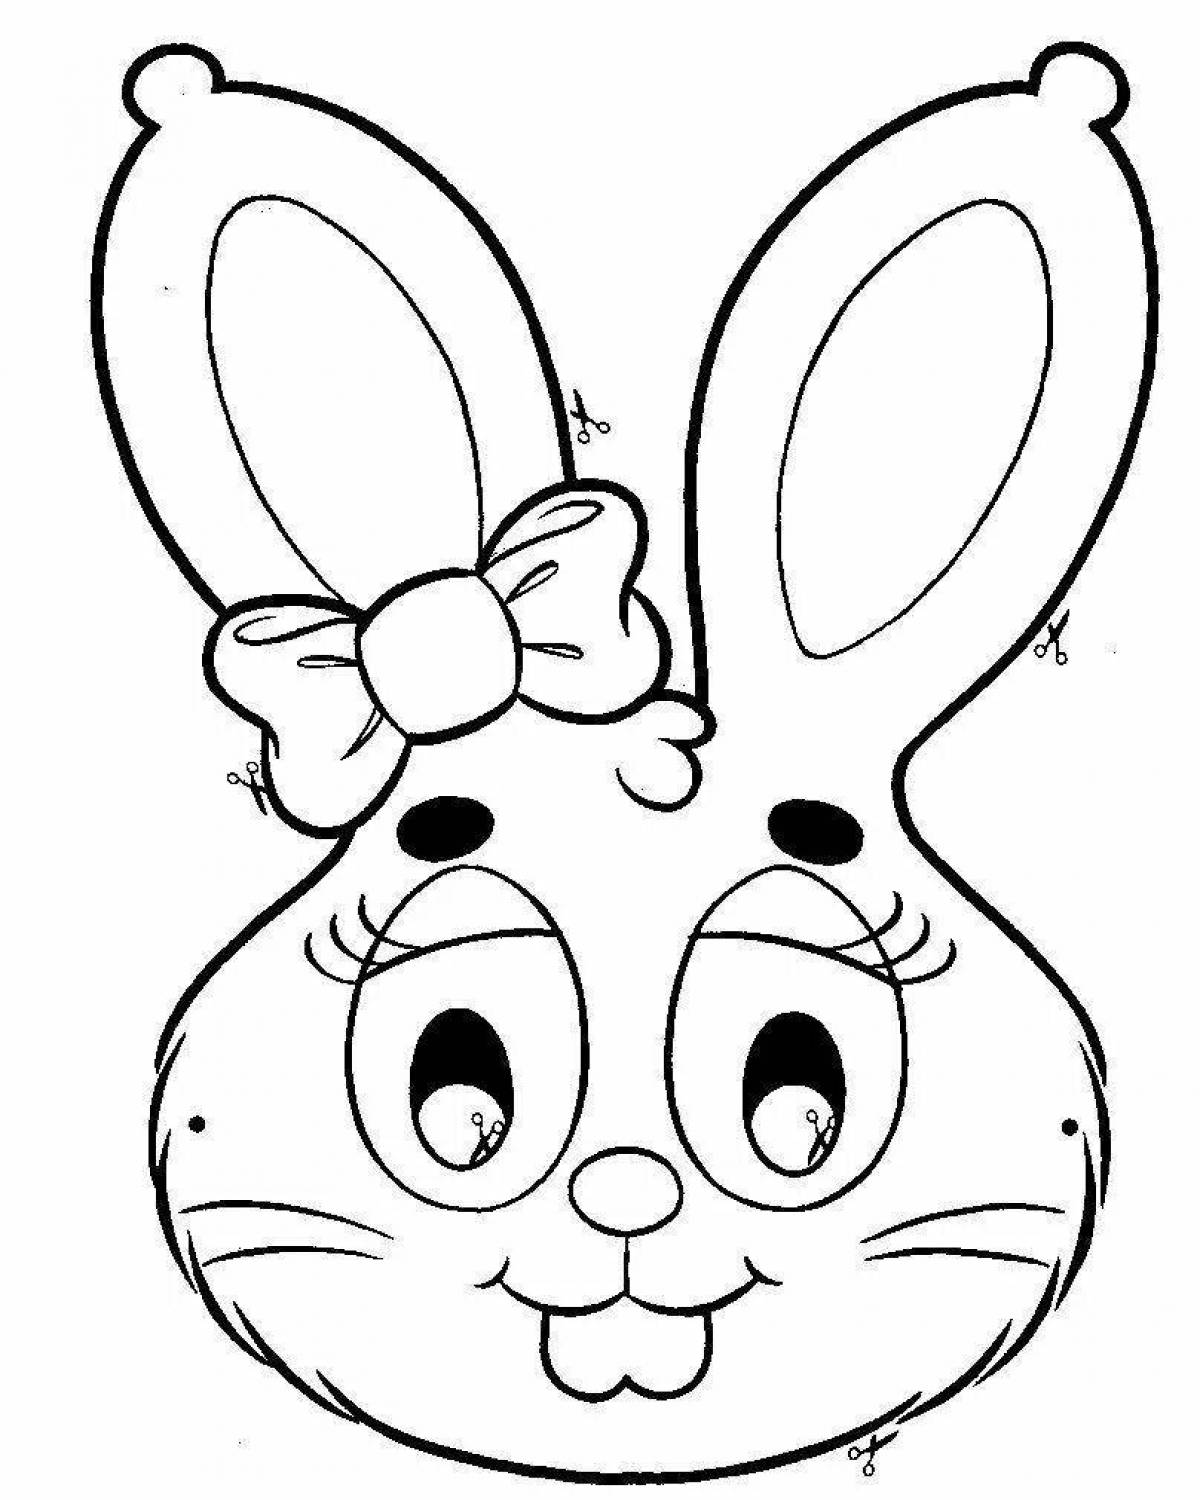 Hare head coloring page